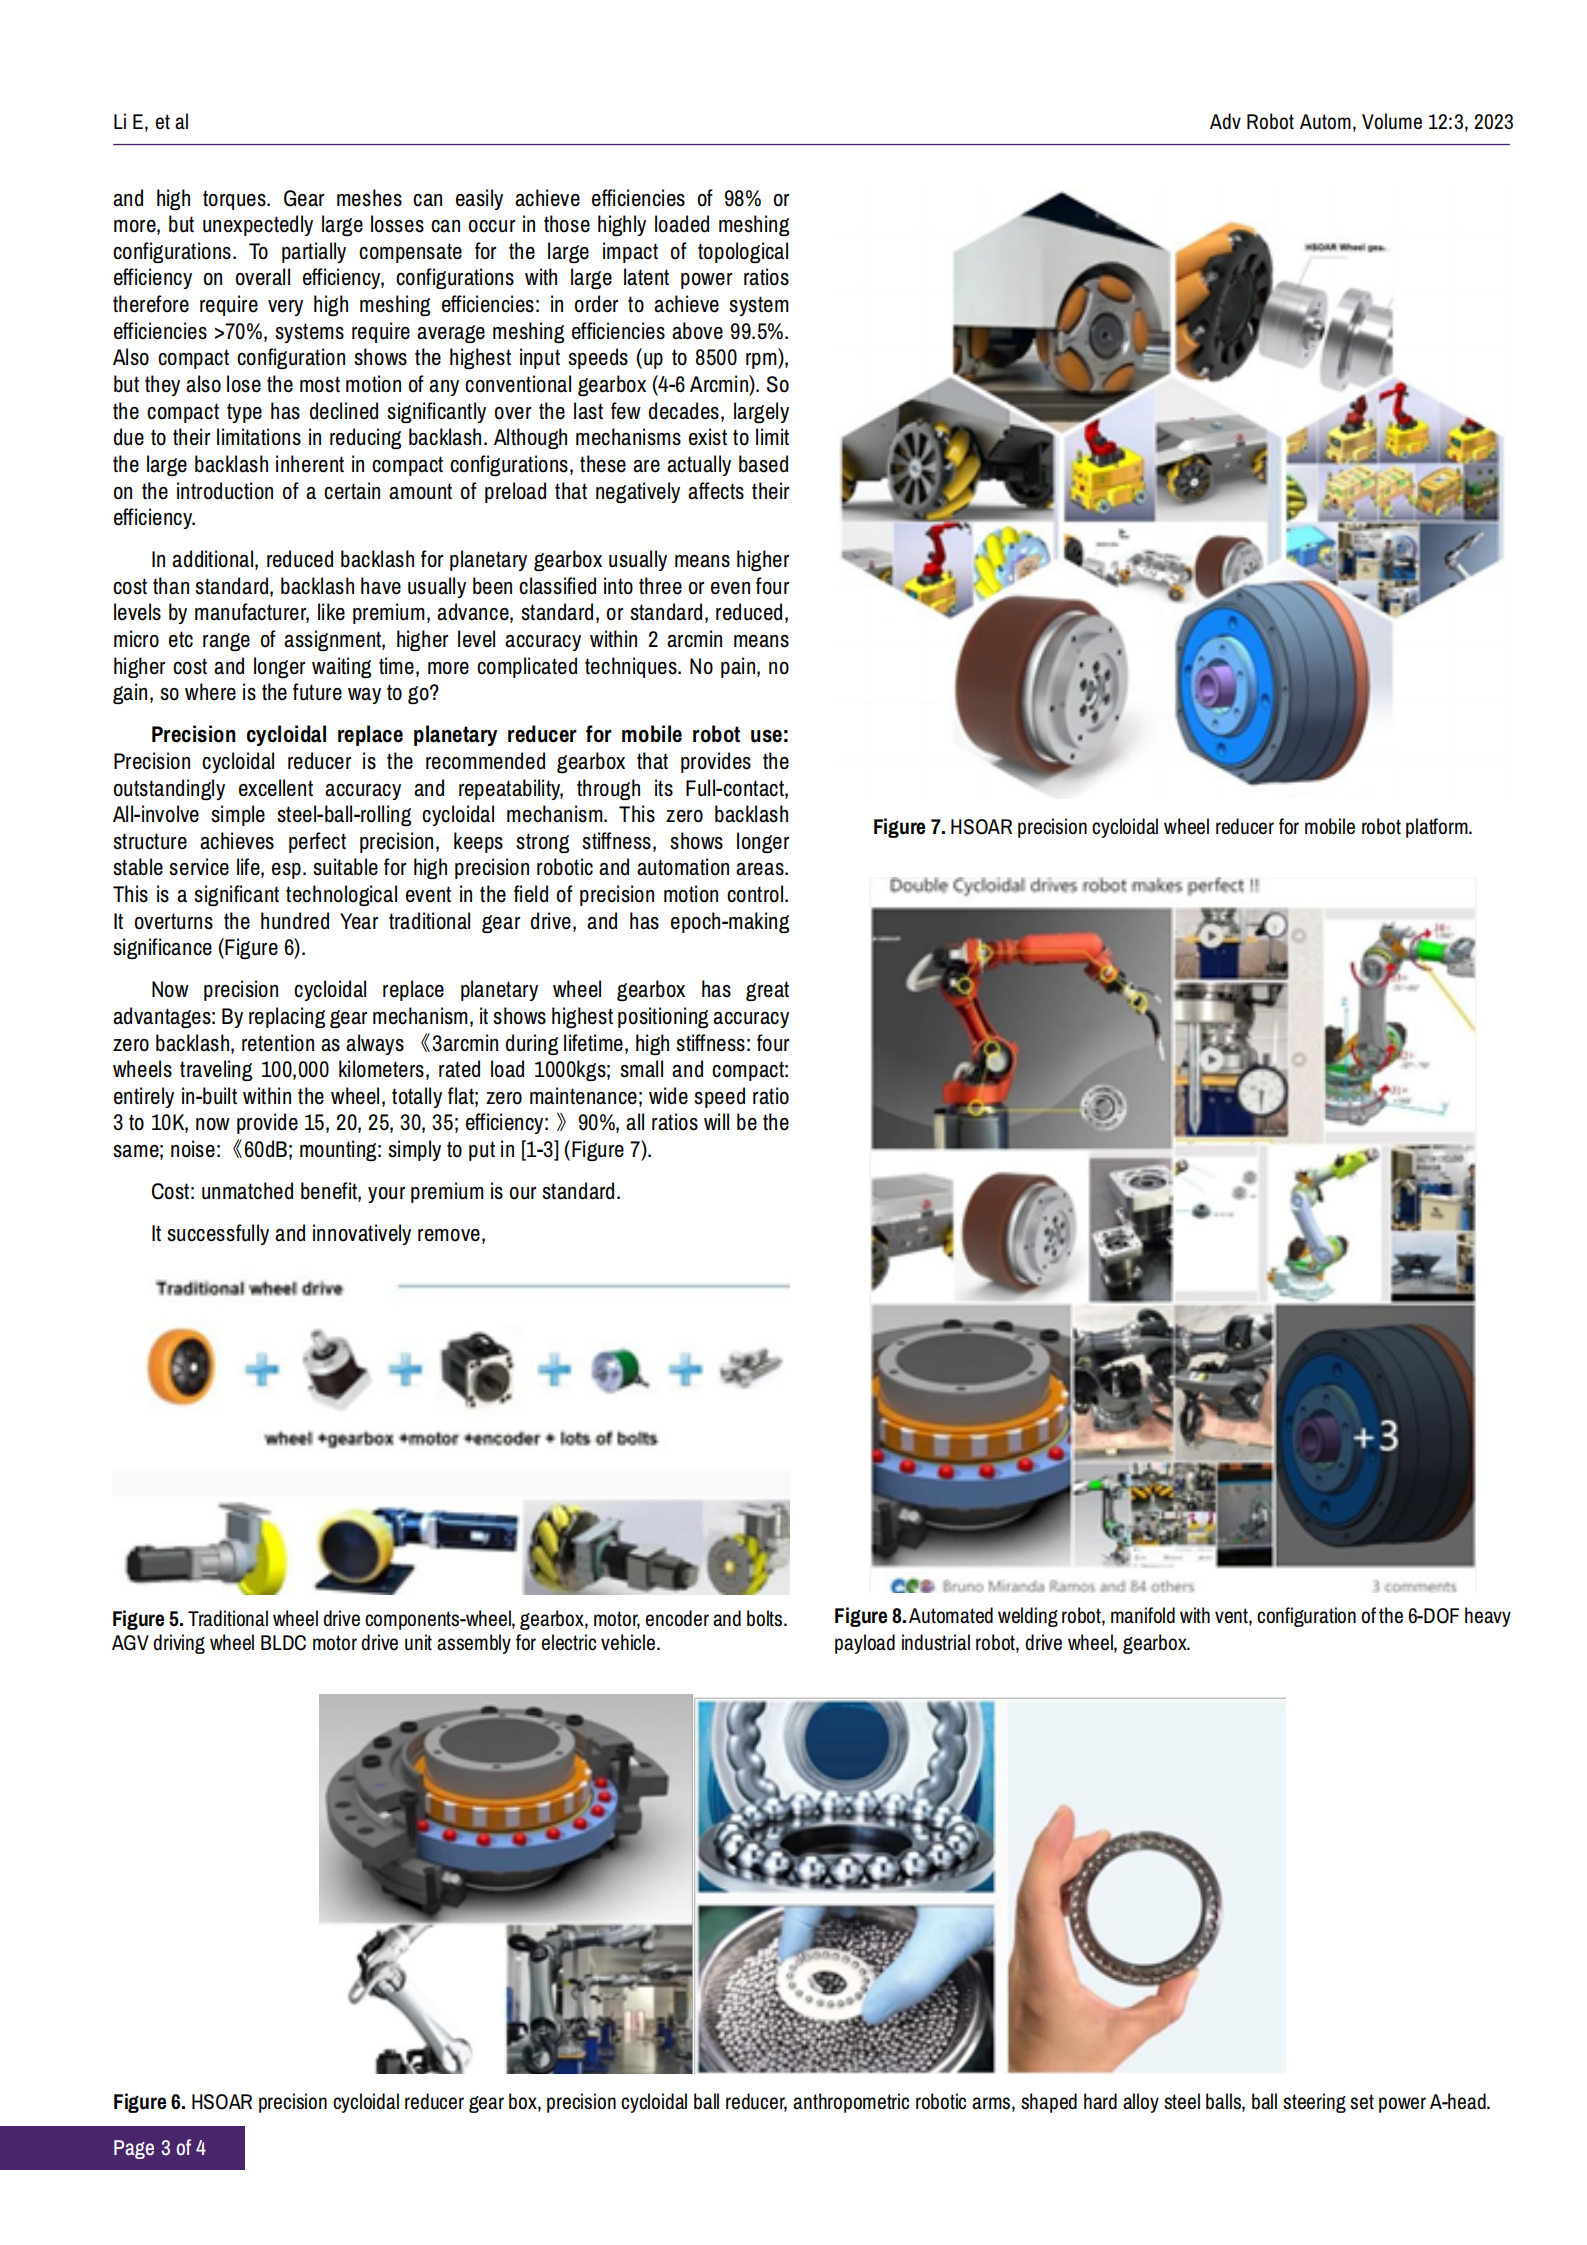 why-precision-ball-cycloidal-reducer-drives-mobile-robot--to-perfect-at-unmatched-cost-benefit (1)_02.png